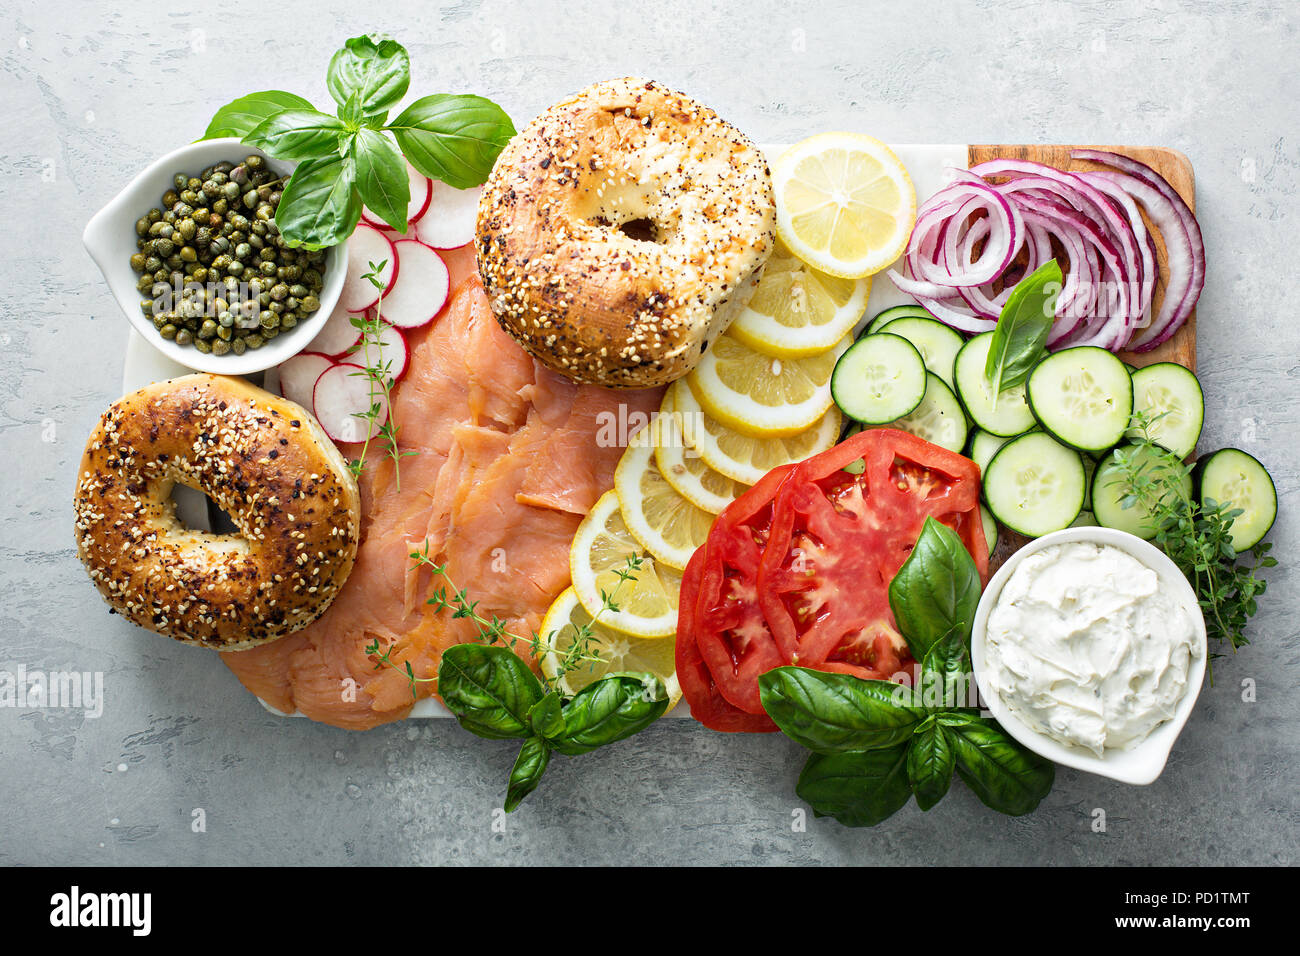 Bagels and lox platter Stock Photo